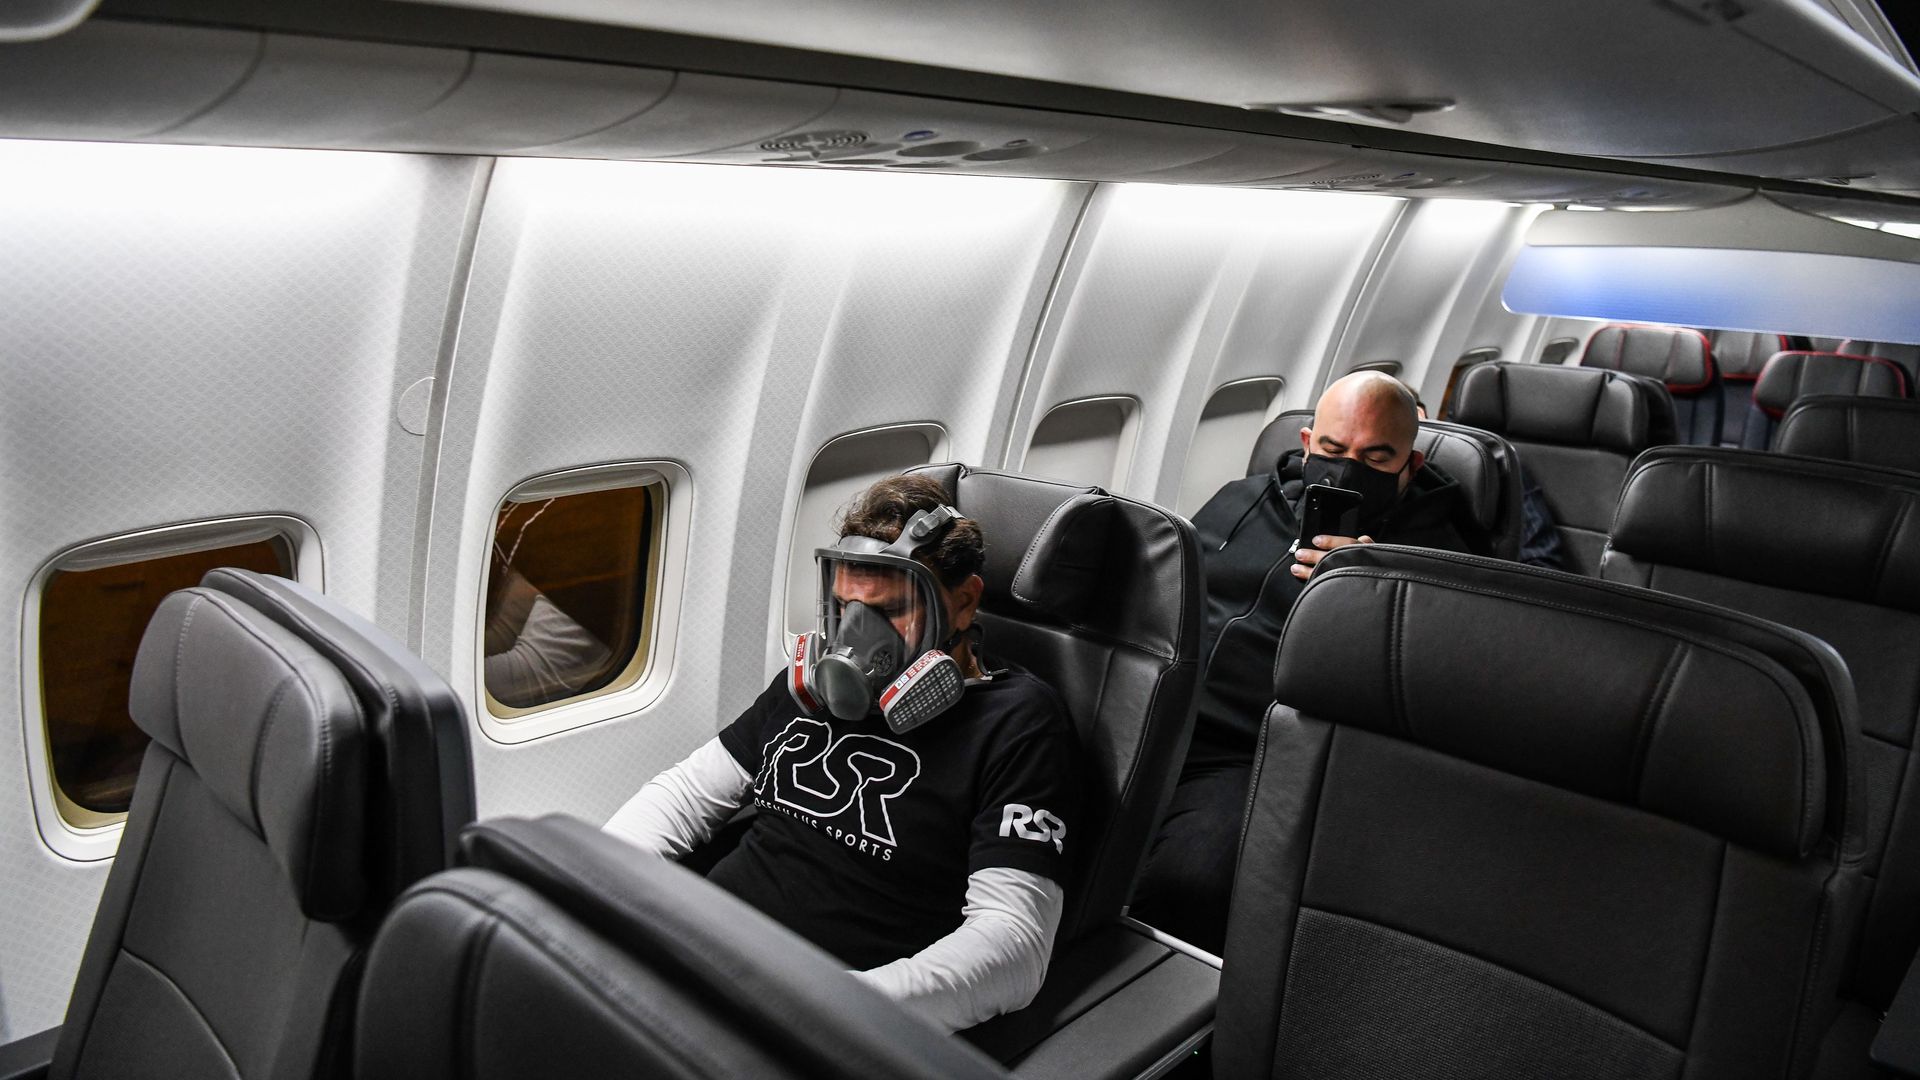 In this image, a man wears a gas mask while sitting on a plane